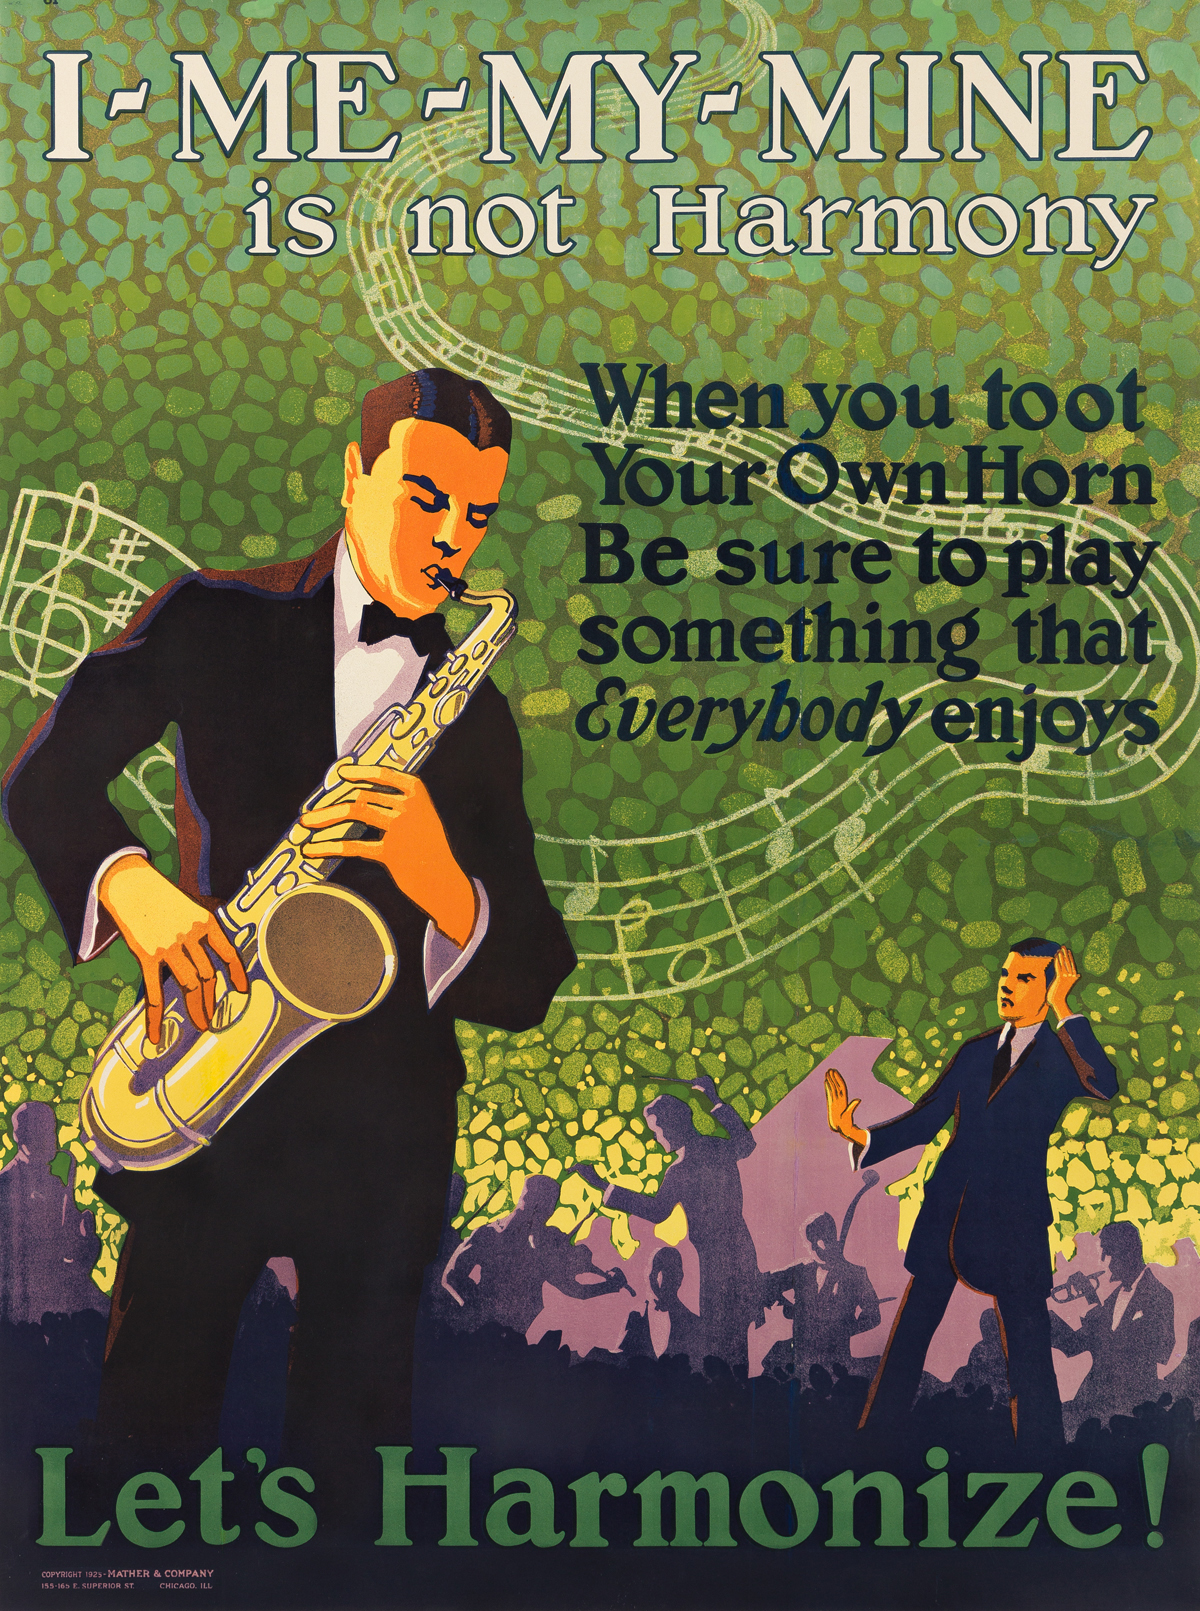 DESIGNER UNKNOWN.  I - ME - MY - MINE IS NOT HARMONY / LETS HARMONIZE! 1925. 48x36 inches, 122x91½ cm. Mather & Company, Chicago.